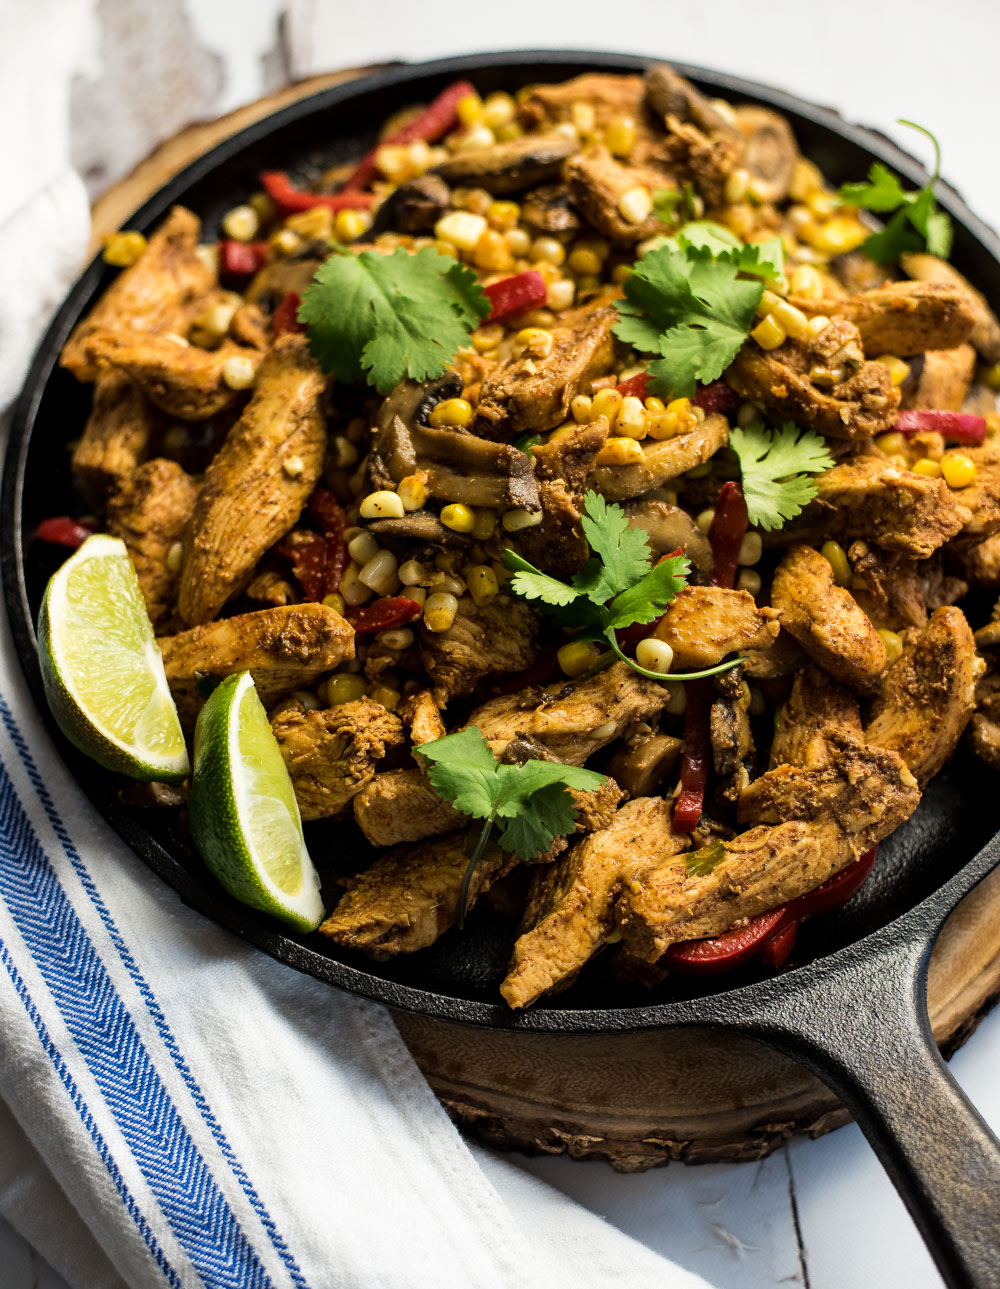 These spicy corn and chicken fajitas are bursting with bold flavors. They are on the table in under an hour and are the perfect weeknight meal!